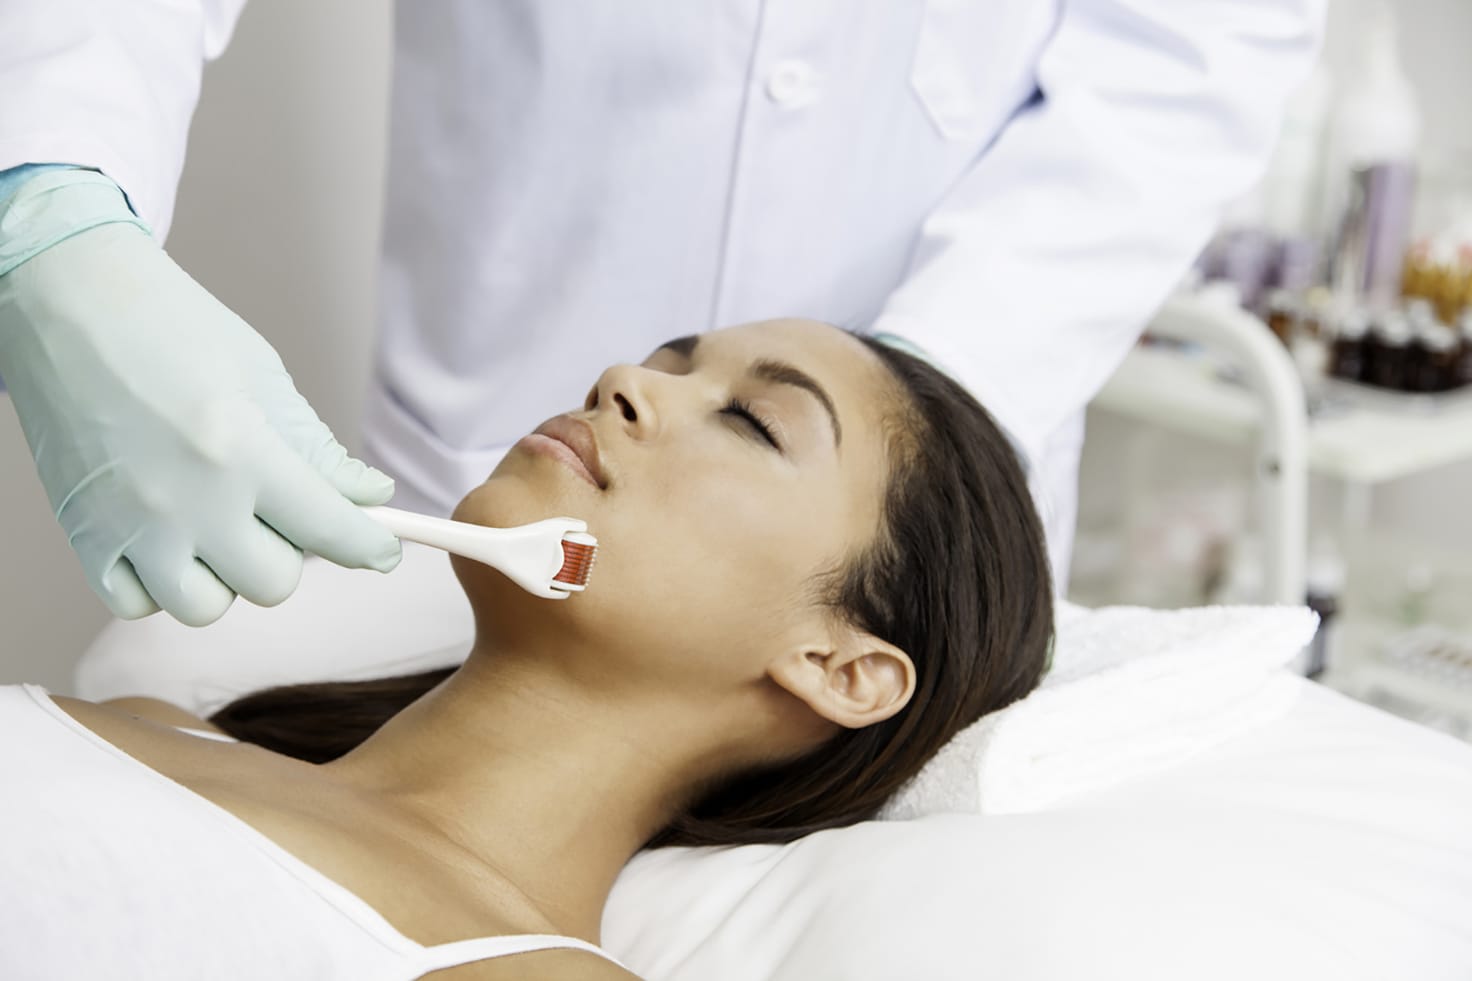 Facials - Micro Needling the right thing for you? Read the guide! - Treatwell